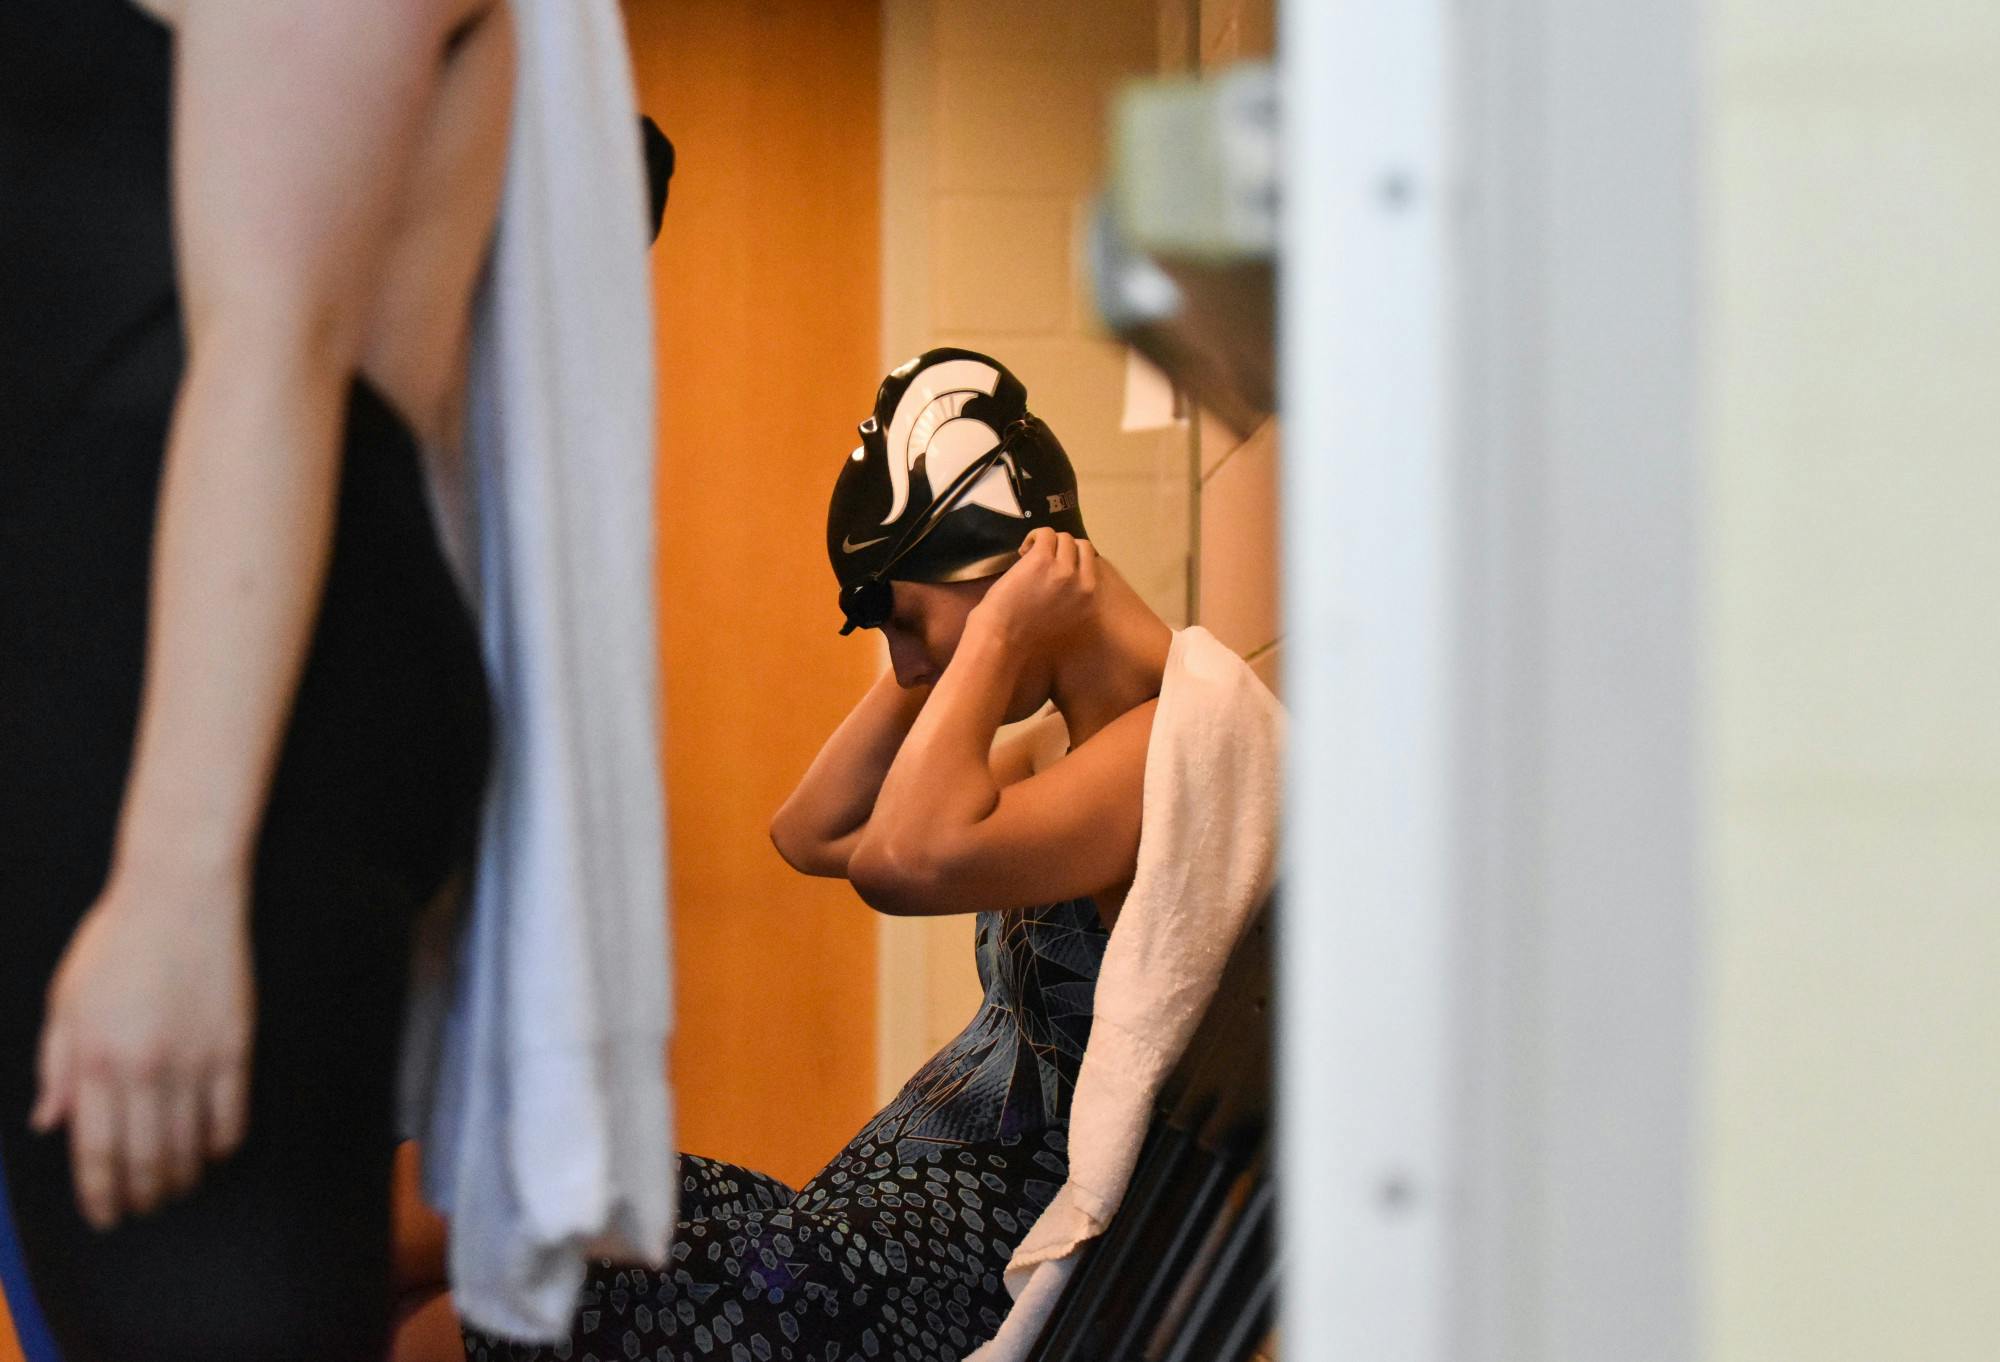 <p>Junior breaststroker Kasey Venn prepares herself for the 100 Yard IM in the ready room during CCS Nationals at McAuley Aquatic Center in Atlanta, Georgia on April 10, 2022. Venn won the event with a time of 58.07. </p>